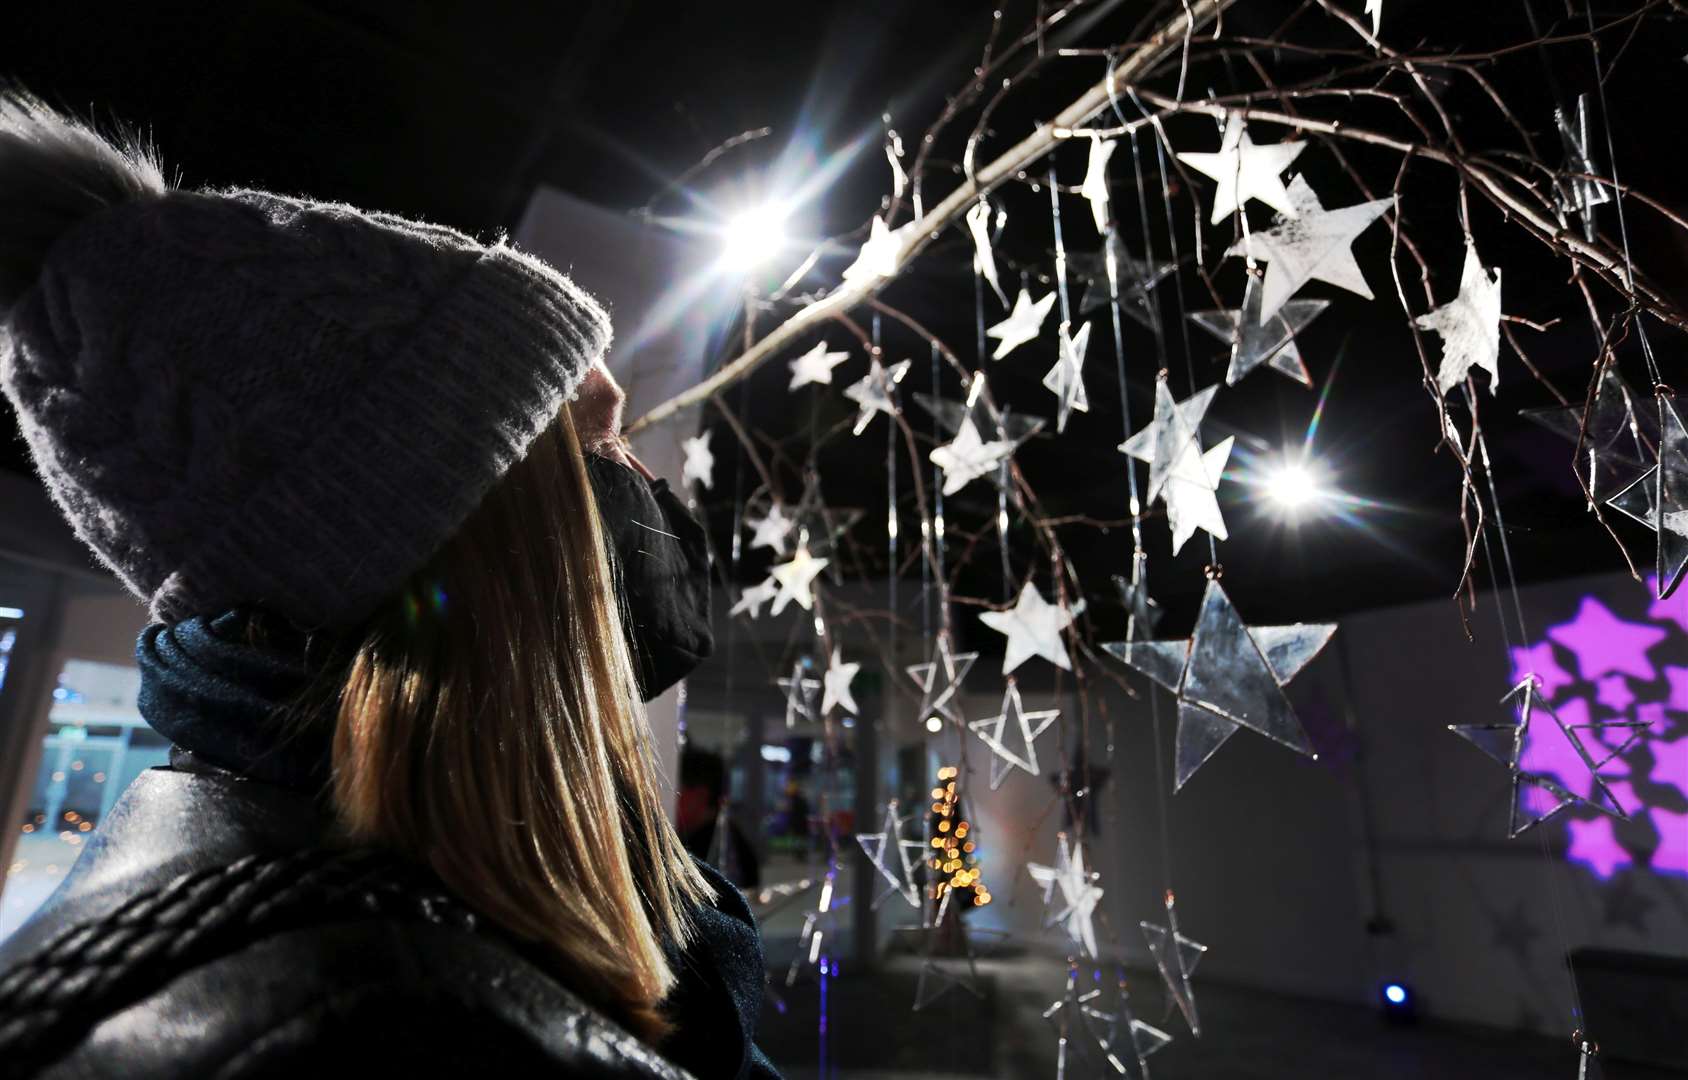 Twinkle Twinkle is one of the first exhibitions at the new St Georges Arts Centre